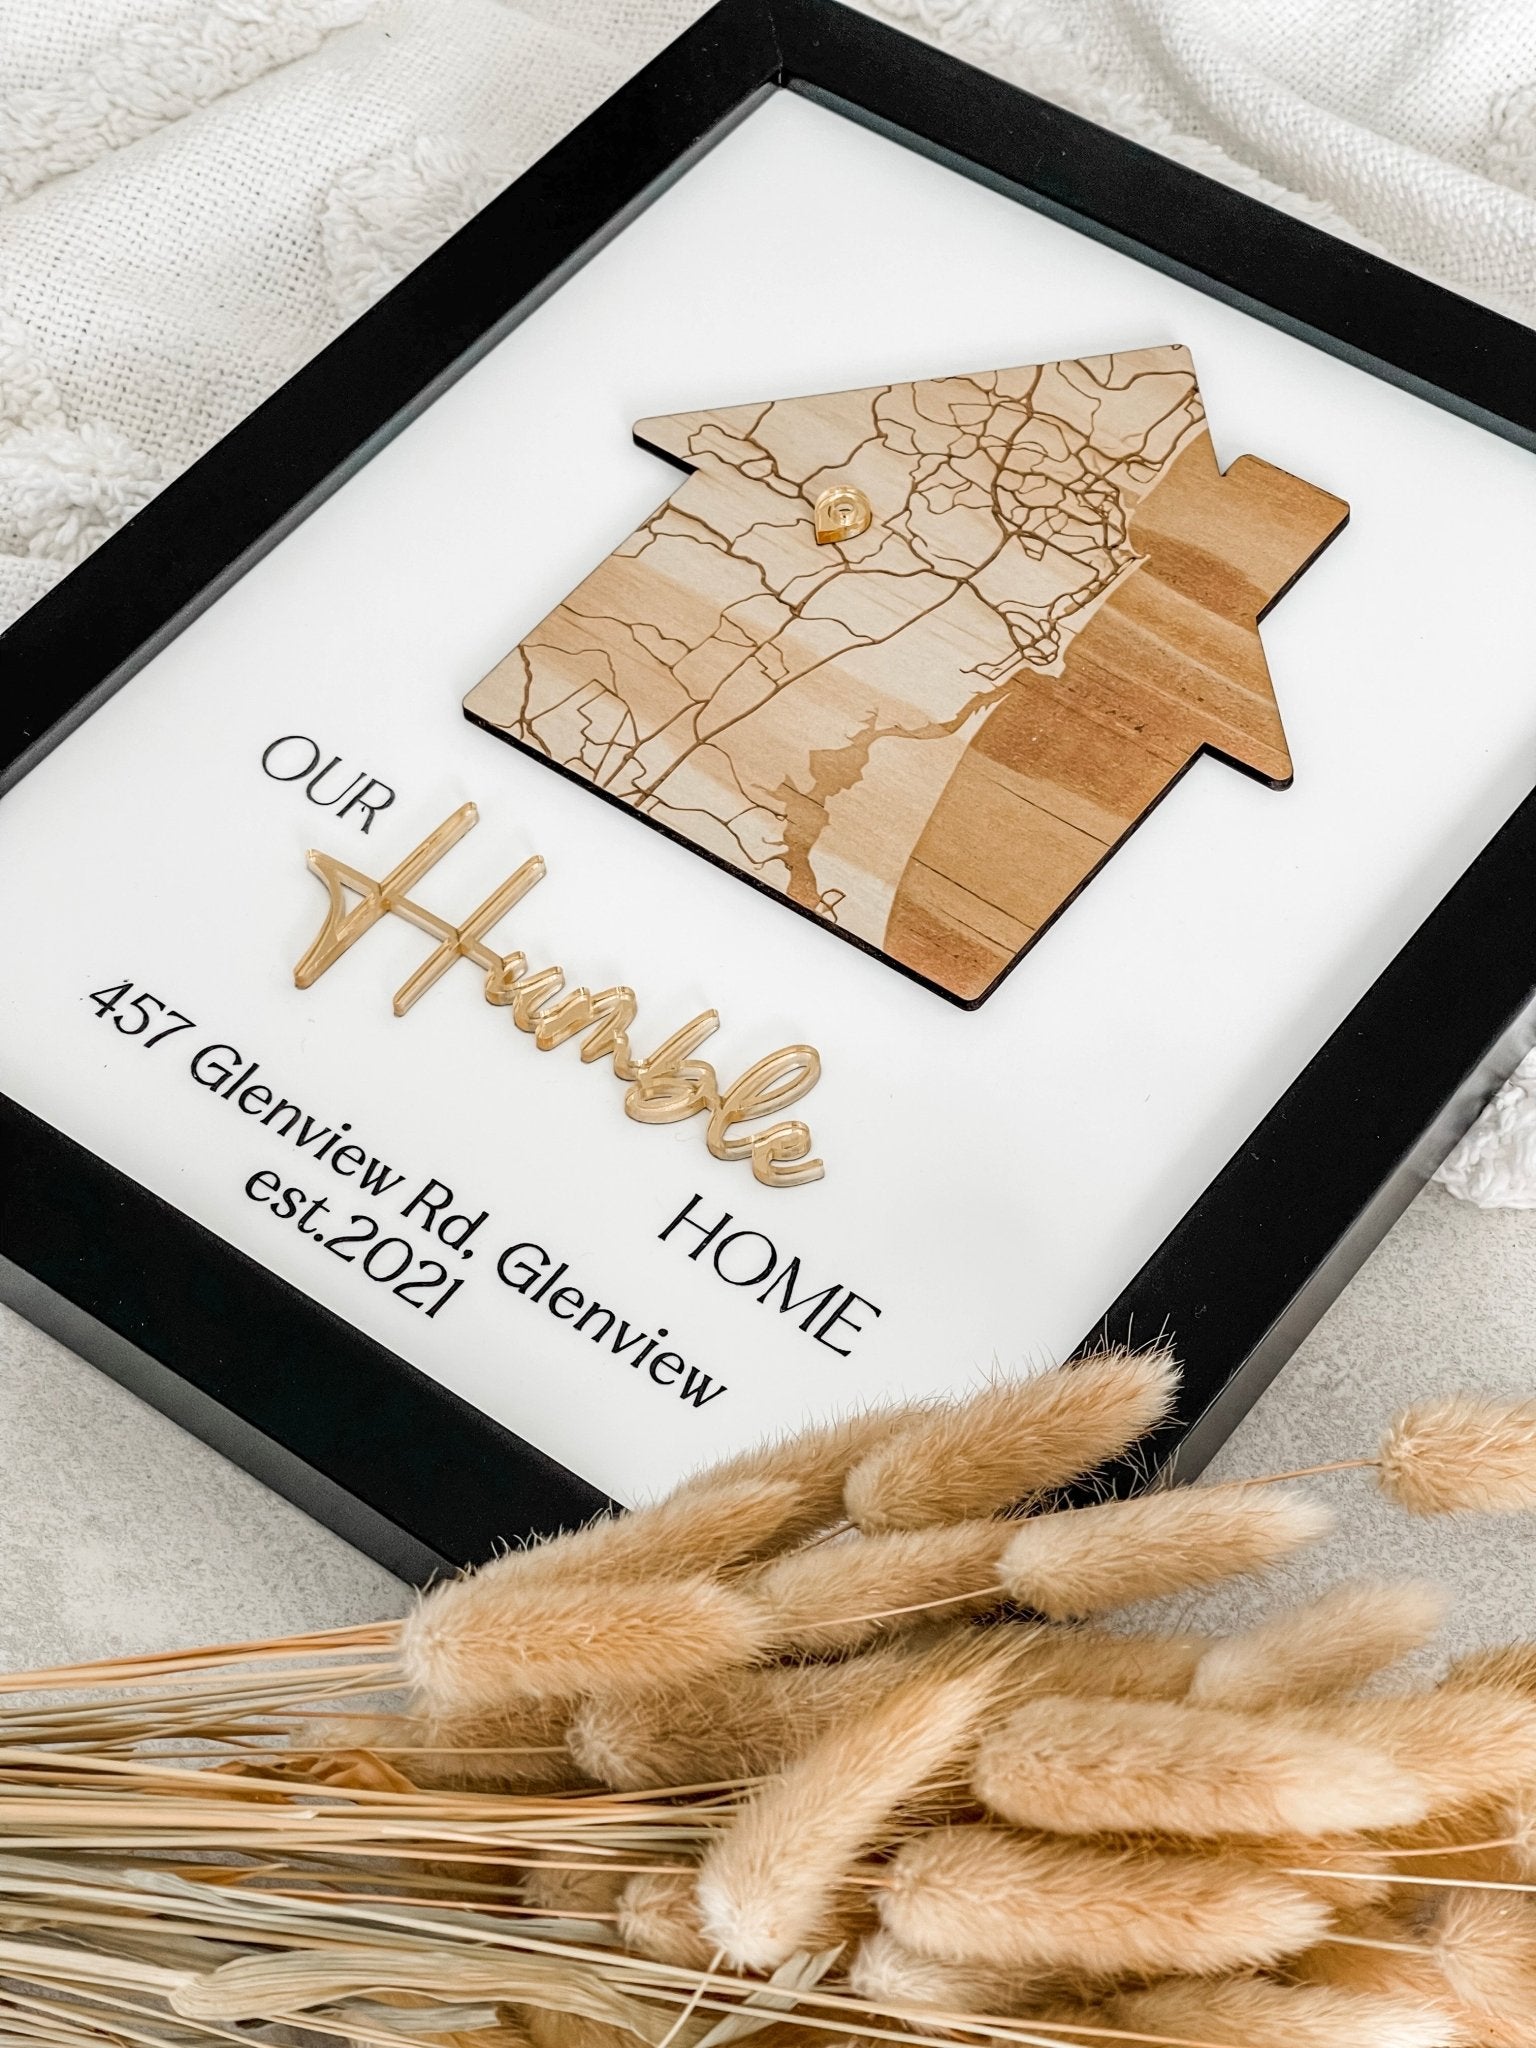 Our Home Frame - The Humble Gift Co.